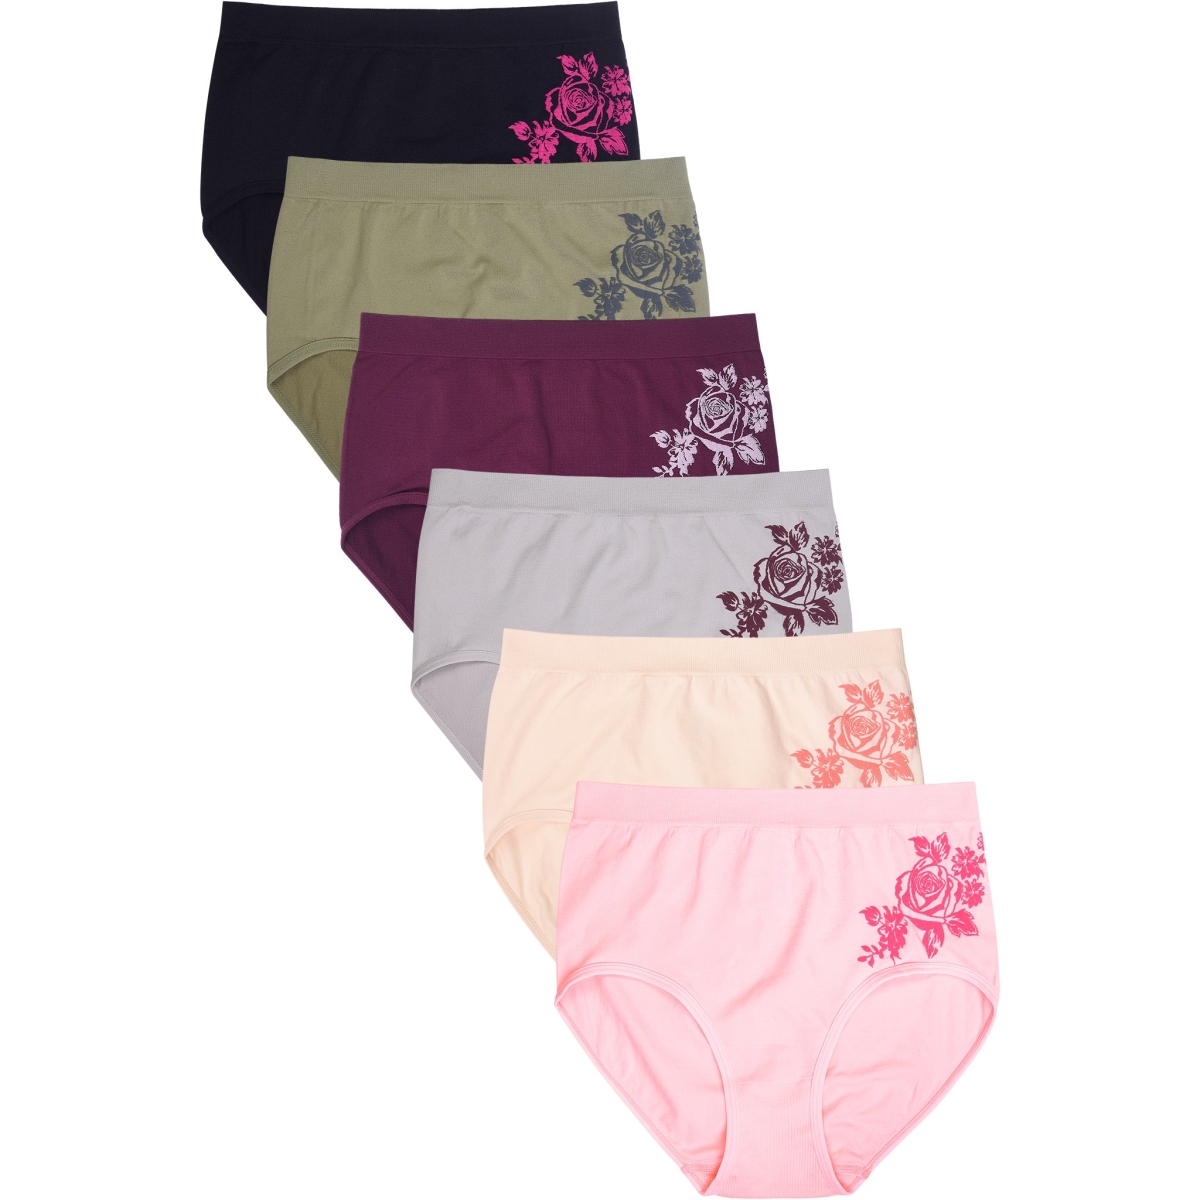 Picture of 247 Frenzy 247-LP0188SR3 Sofra Womens Essentials Seamless Nylon Stretch Brief Panty Underwear - Assorted Color - One Size - Pack of 6